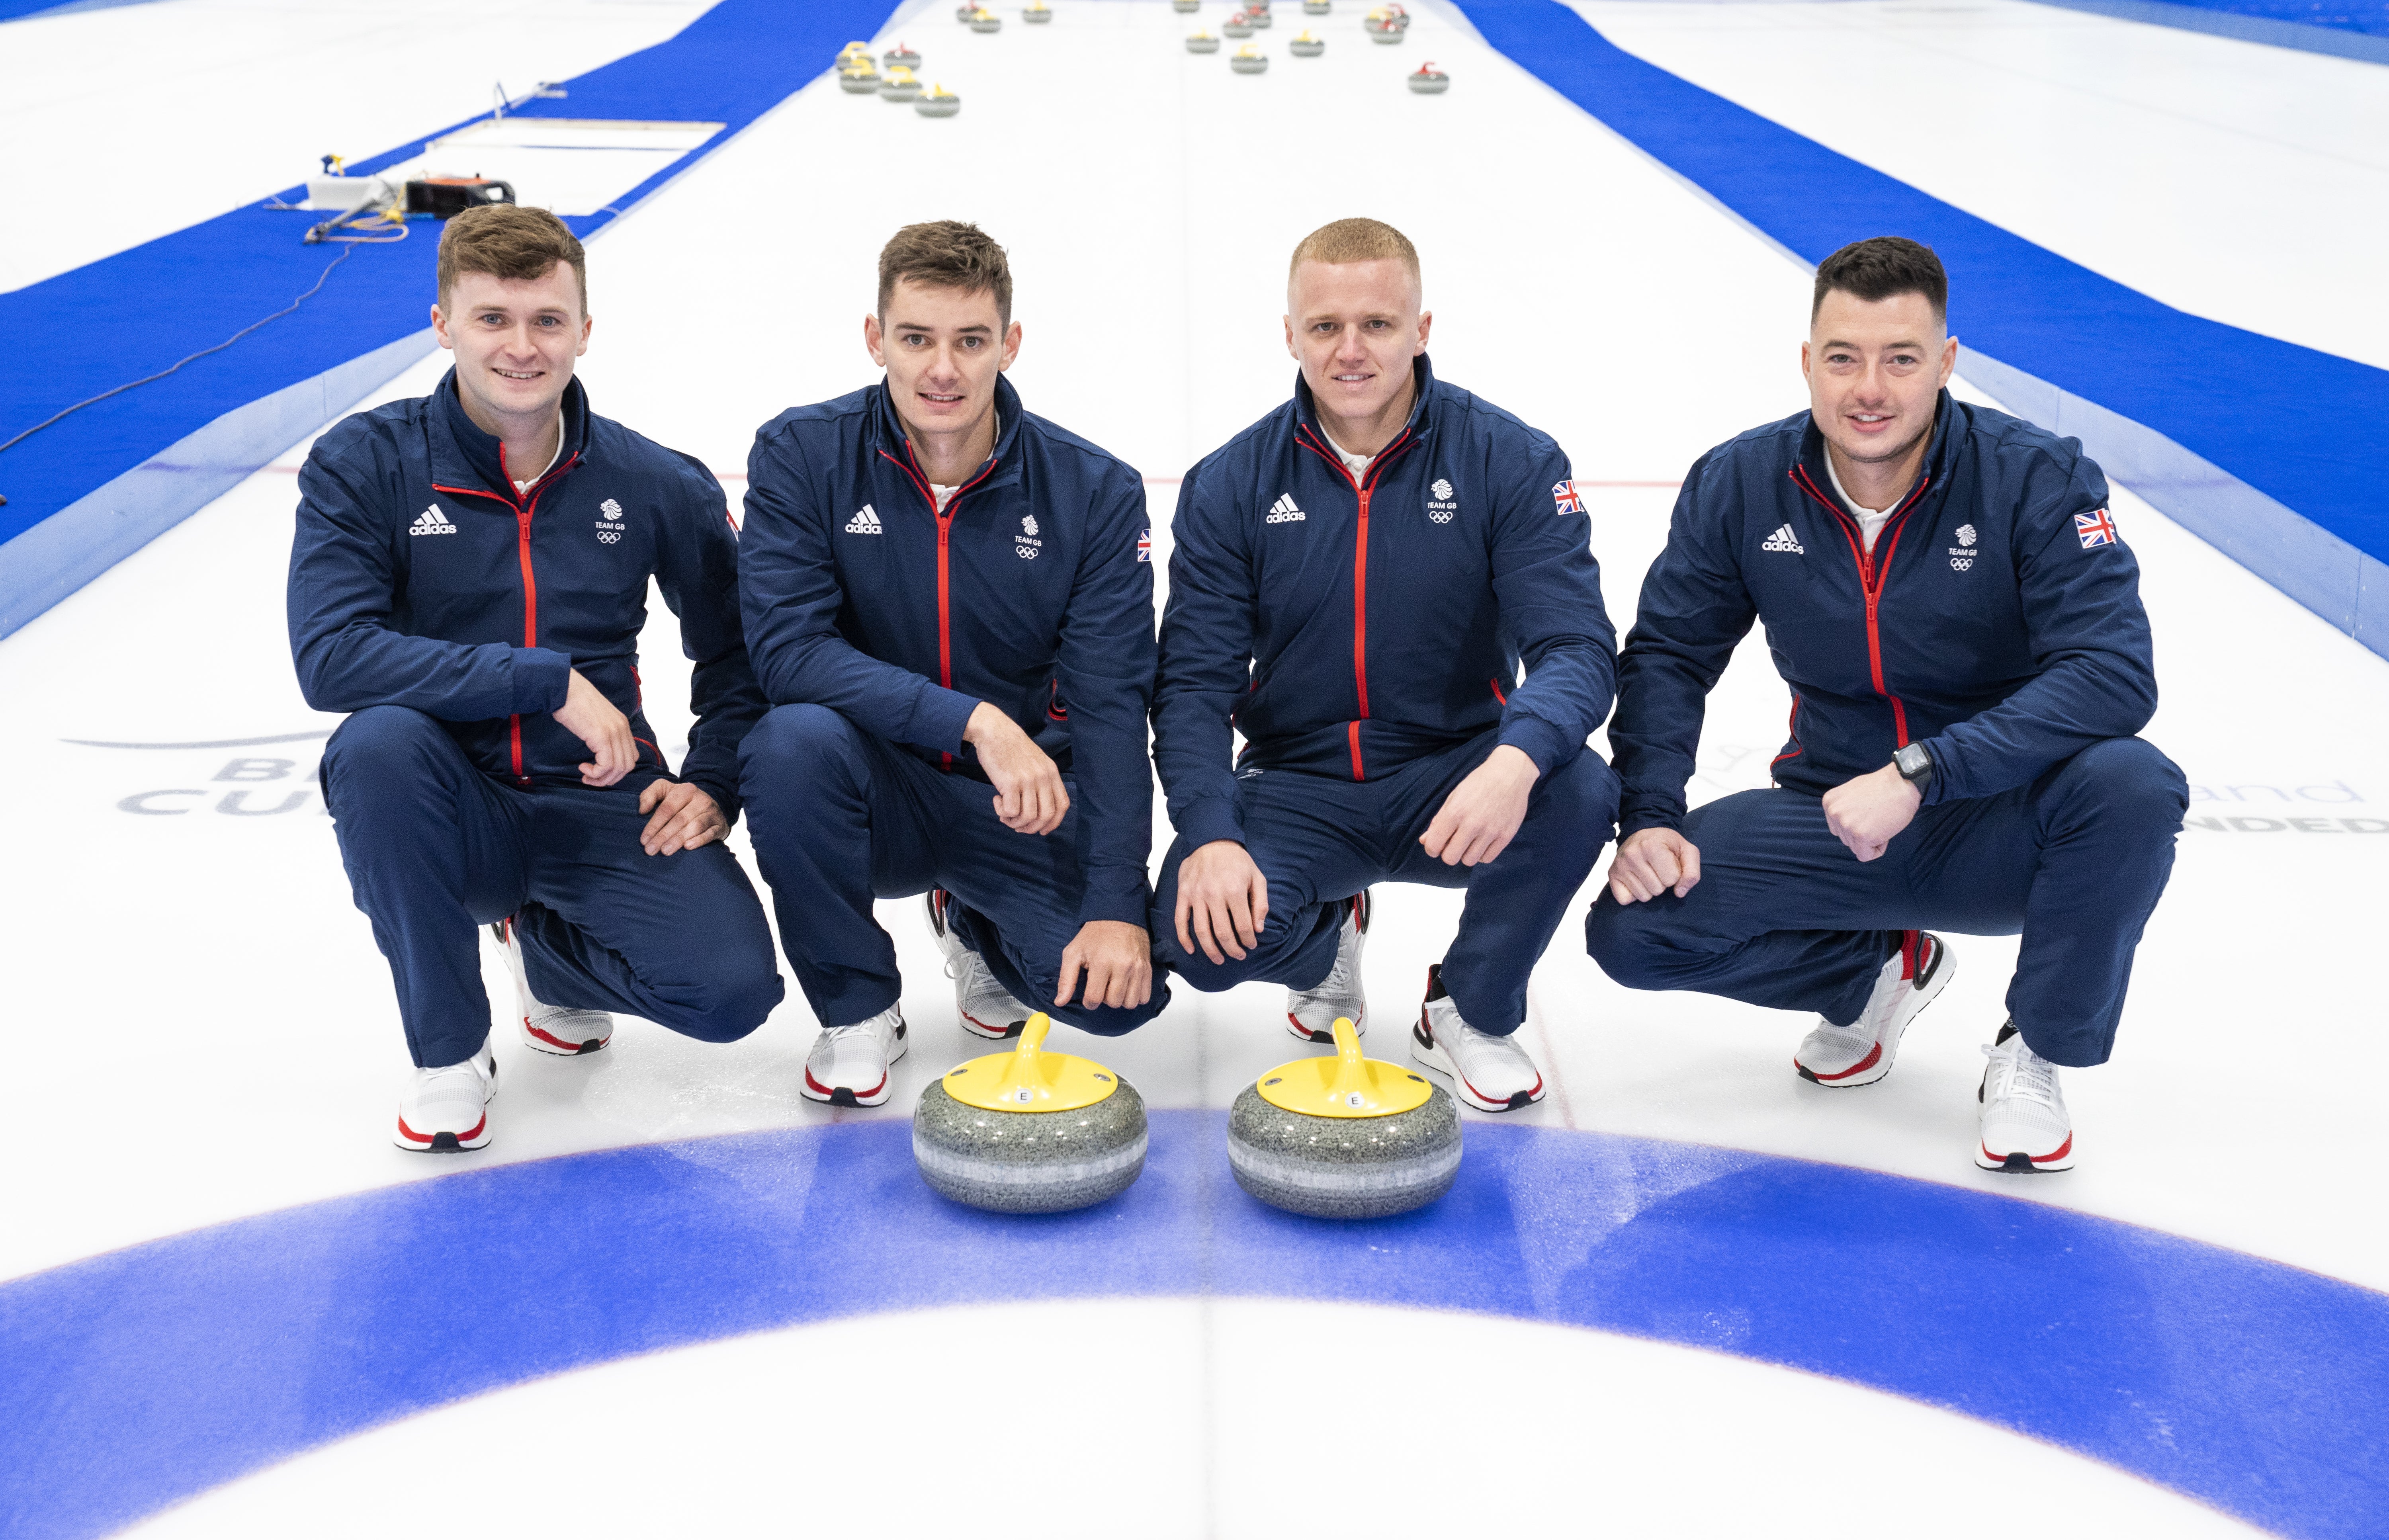 Grant Hardie, Bobby Lammie, Bruce Mouat, and Hammy McMillan will form the GB men’s curling team at the Winter Olympics (Jane Barlow/PA)